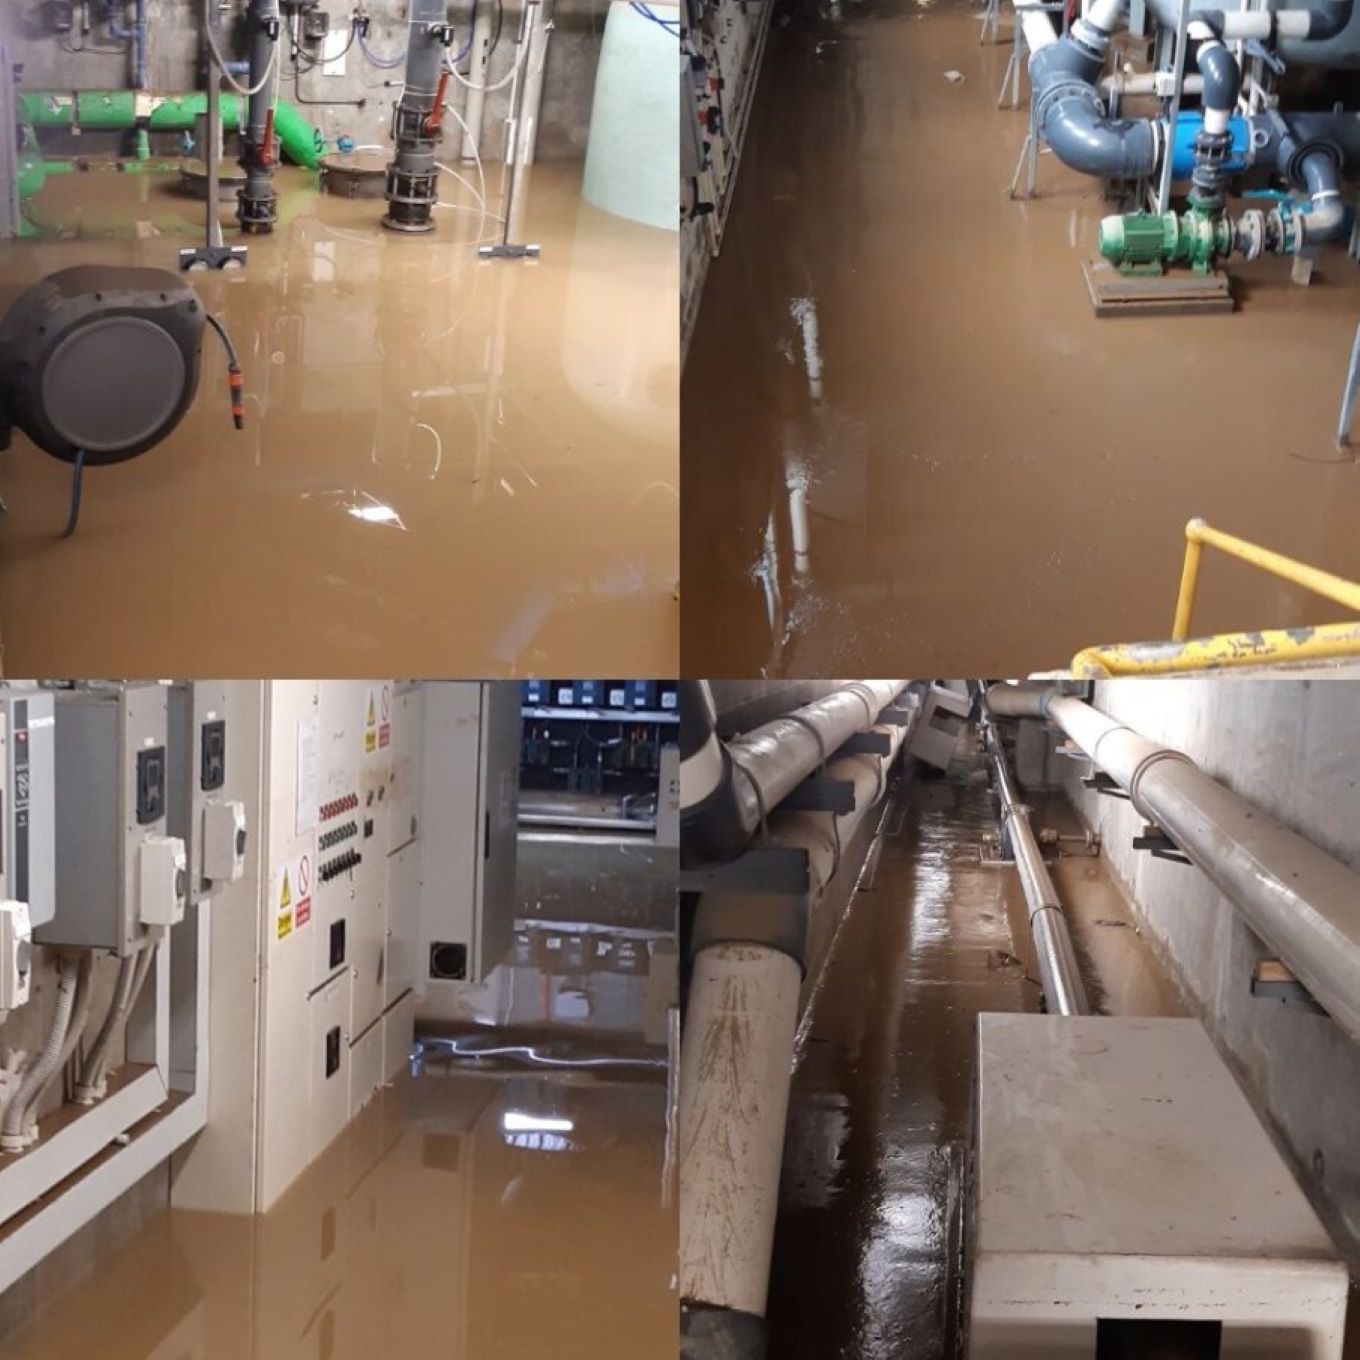 The impact of flooding on operating equipment earlier this year.